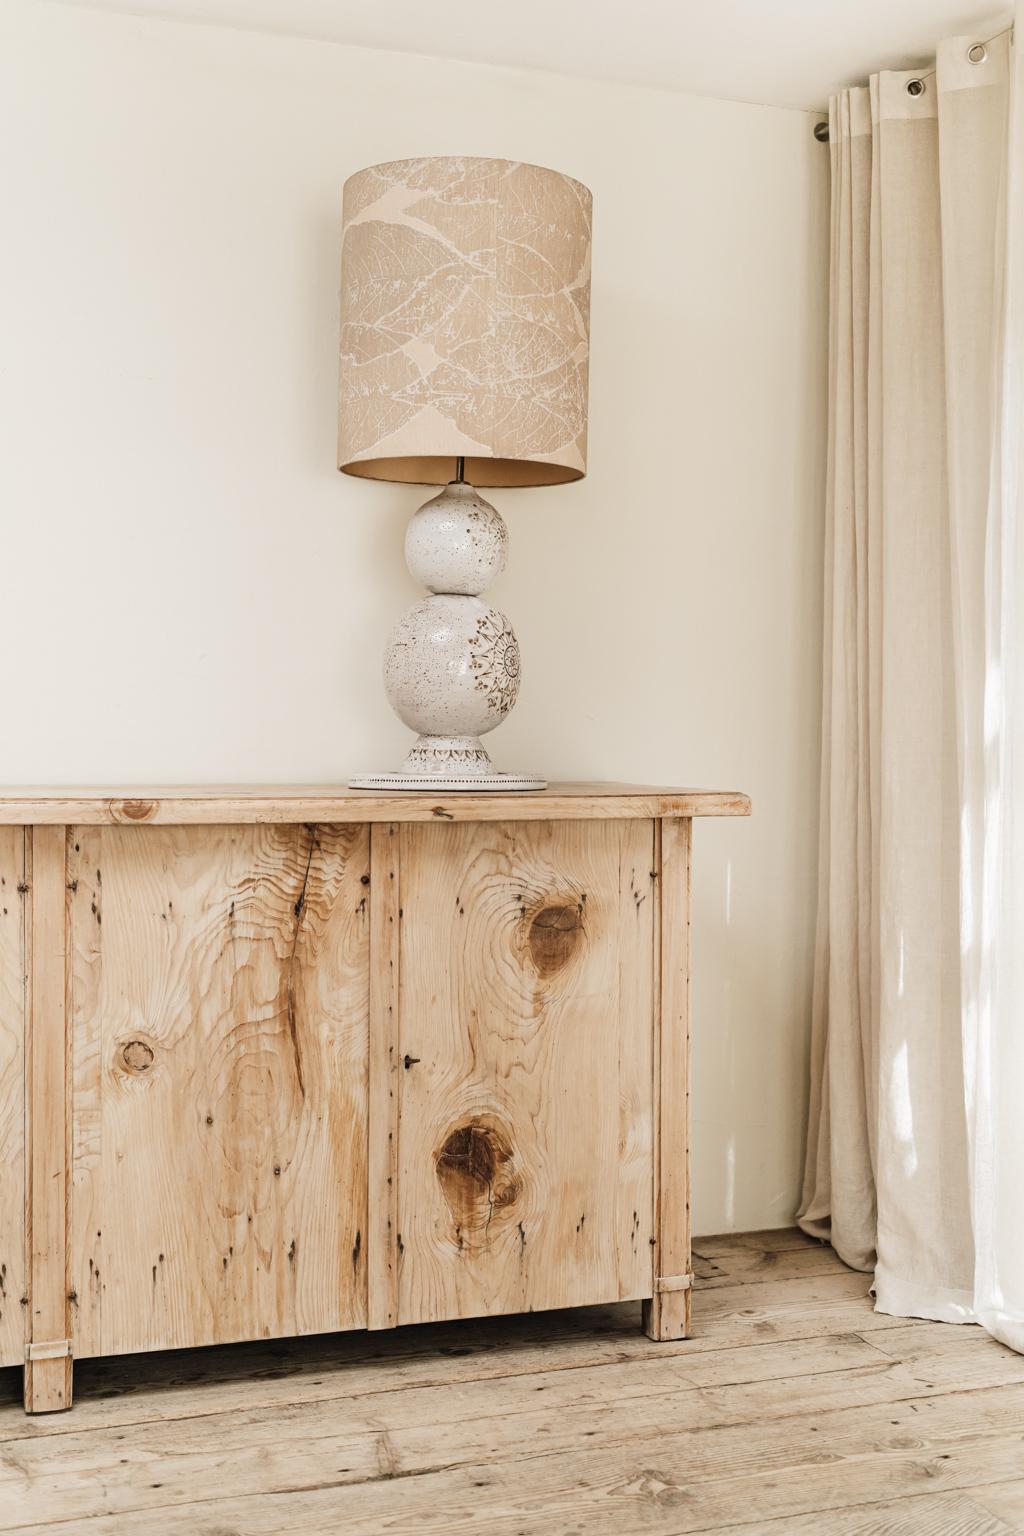 In love with this 1970s ceramic table lamp, with its original lampshade.
Ready to brighten up your interior.